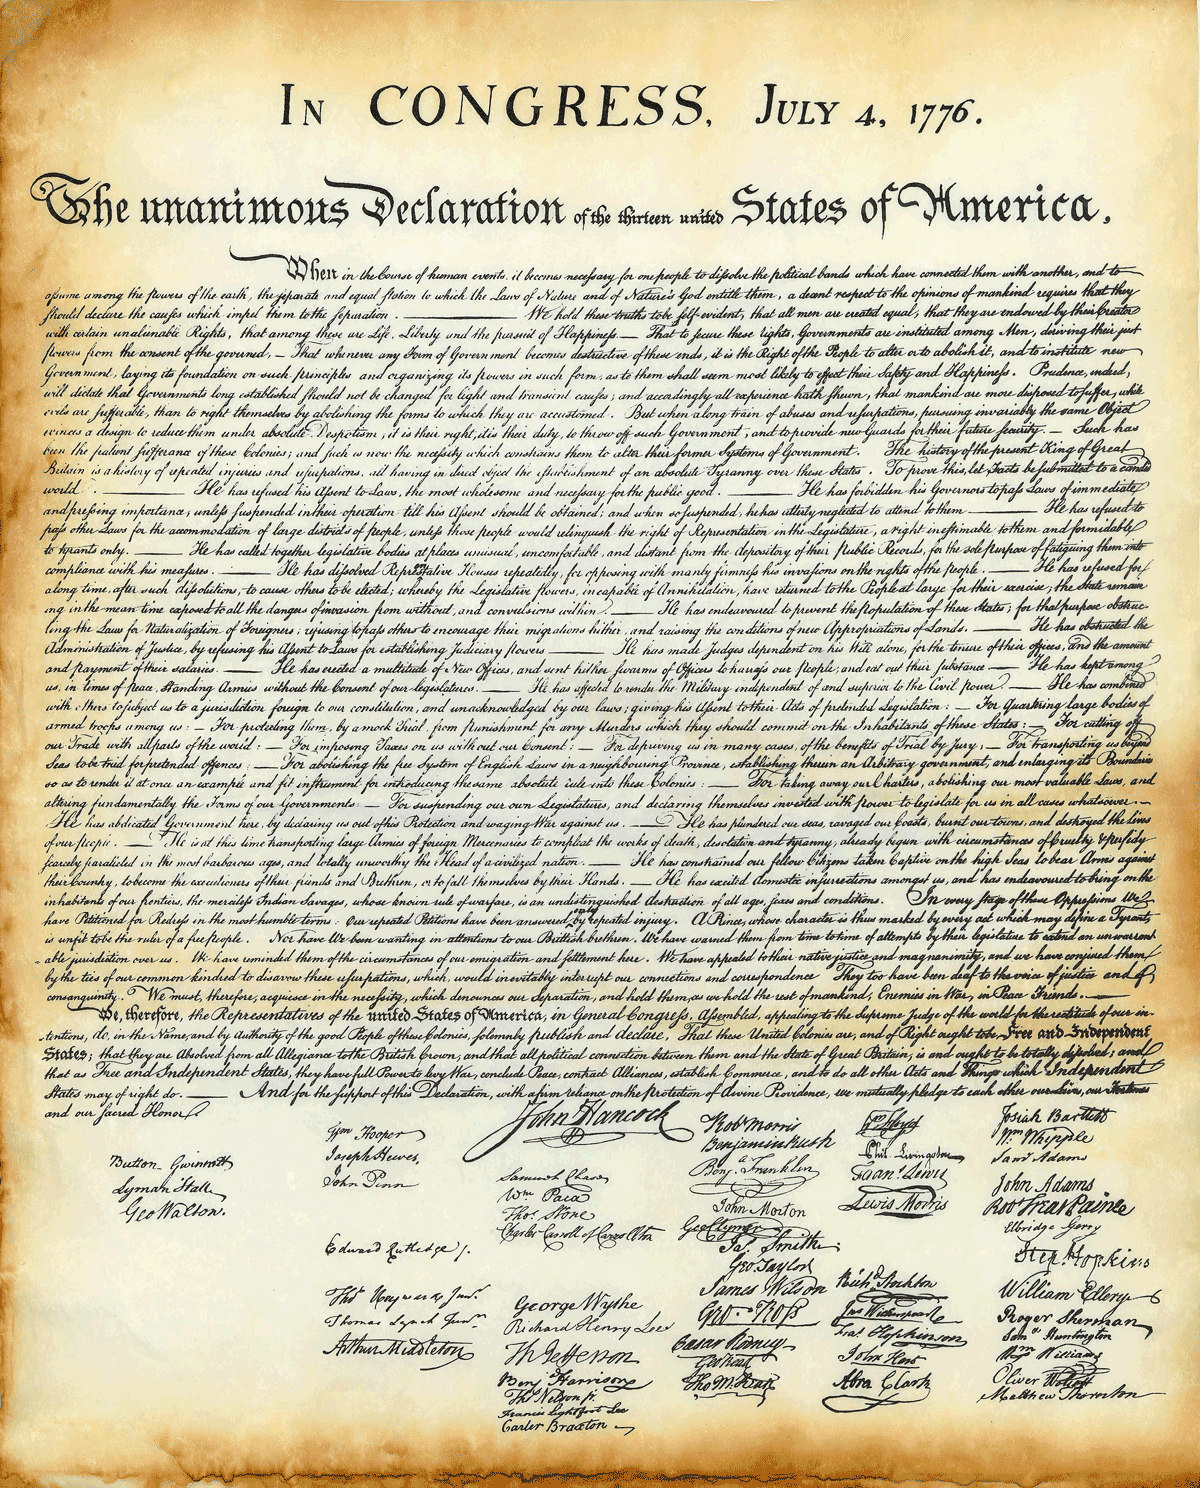 DE UNANIMOUS  DECLARATION OF INDEPENDENCE OF THE THIRTEEN UNITED STATES OF AMERICA